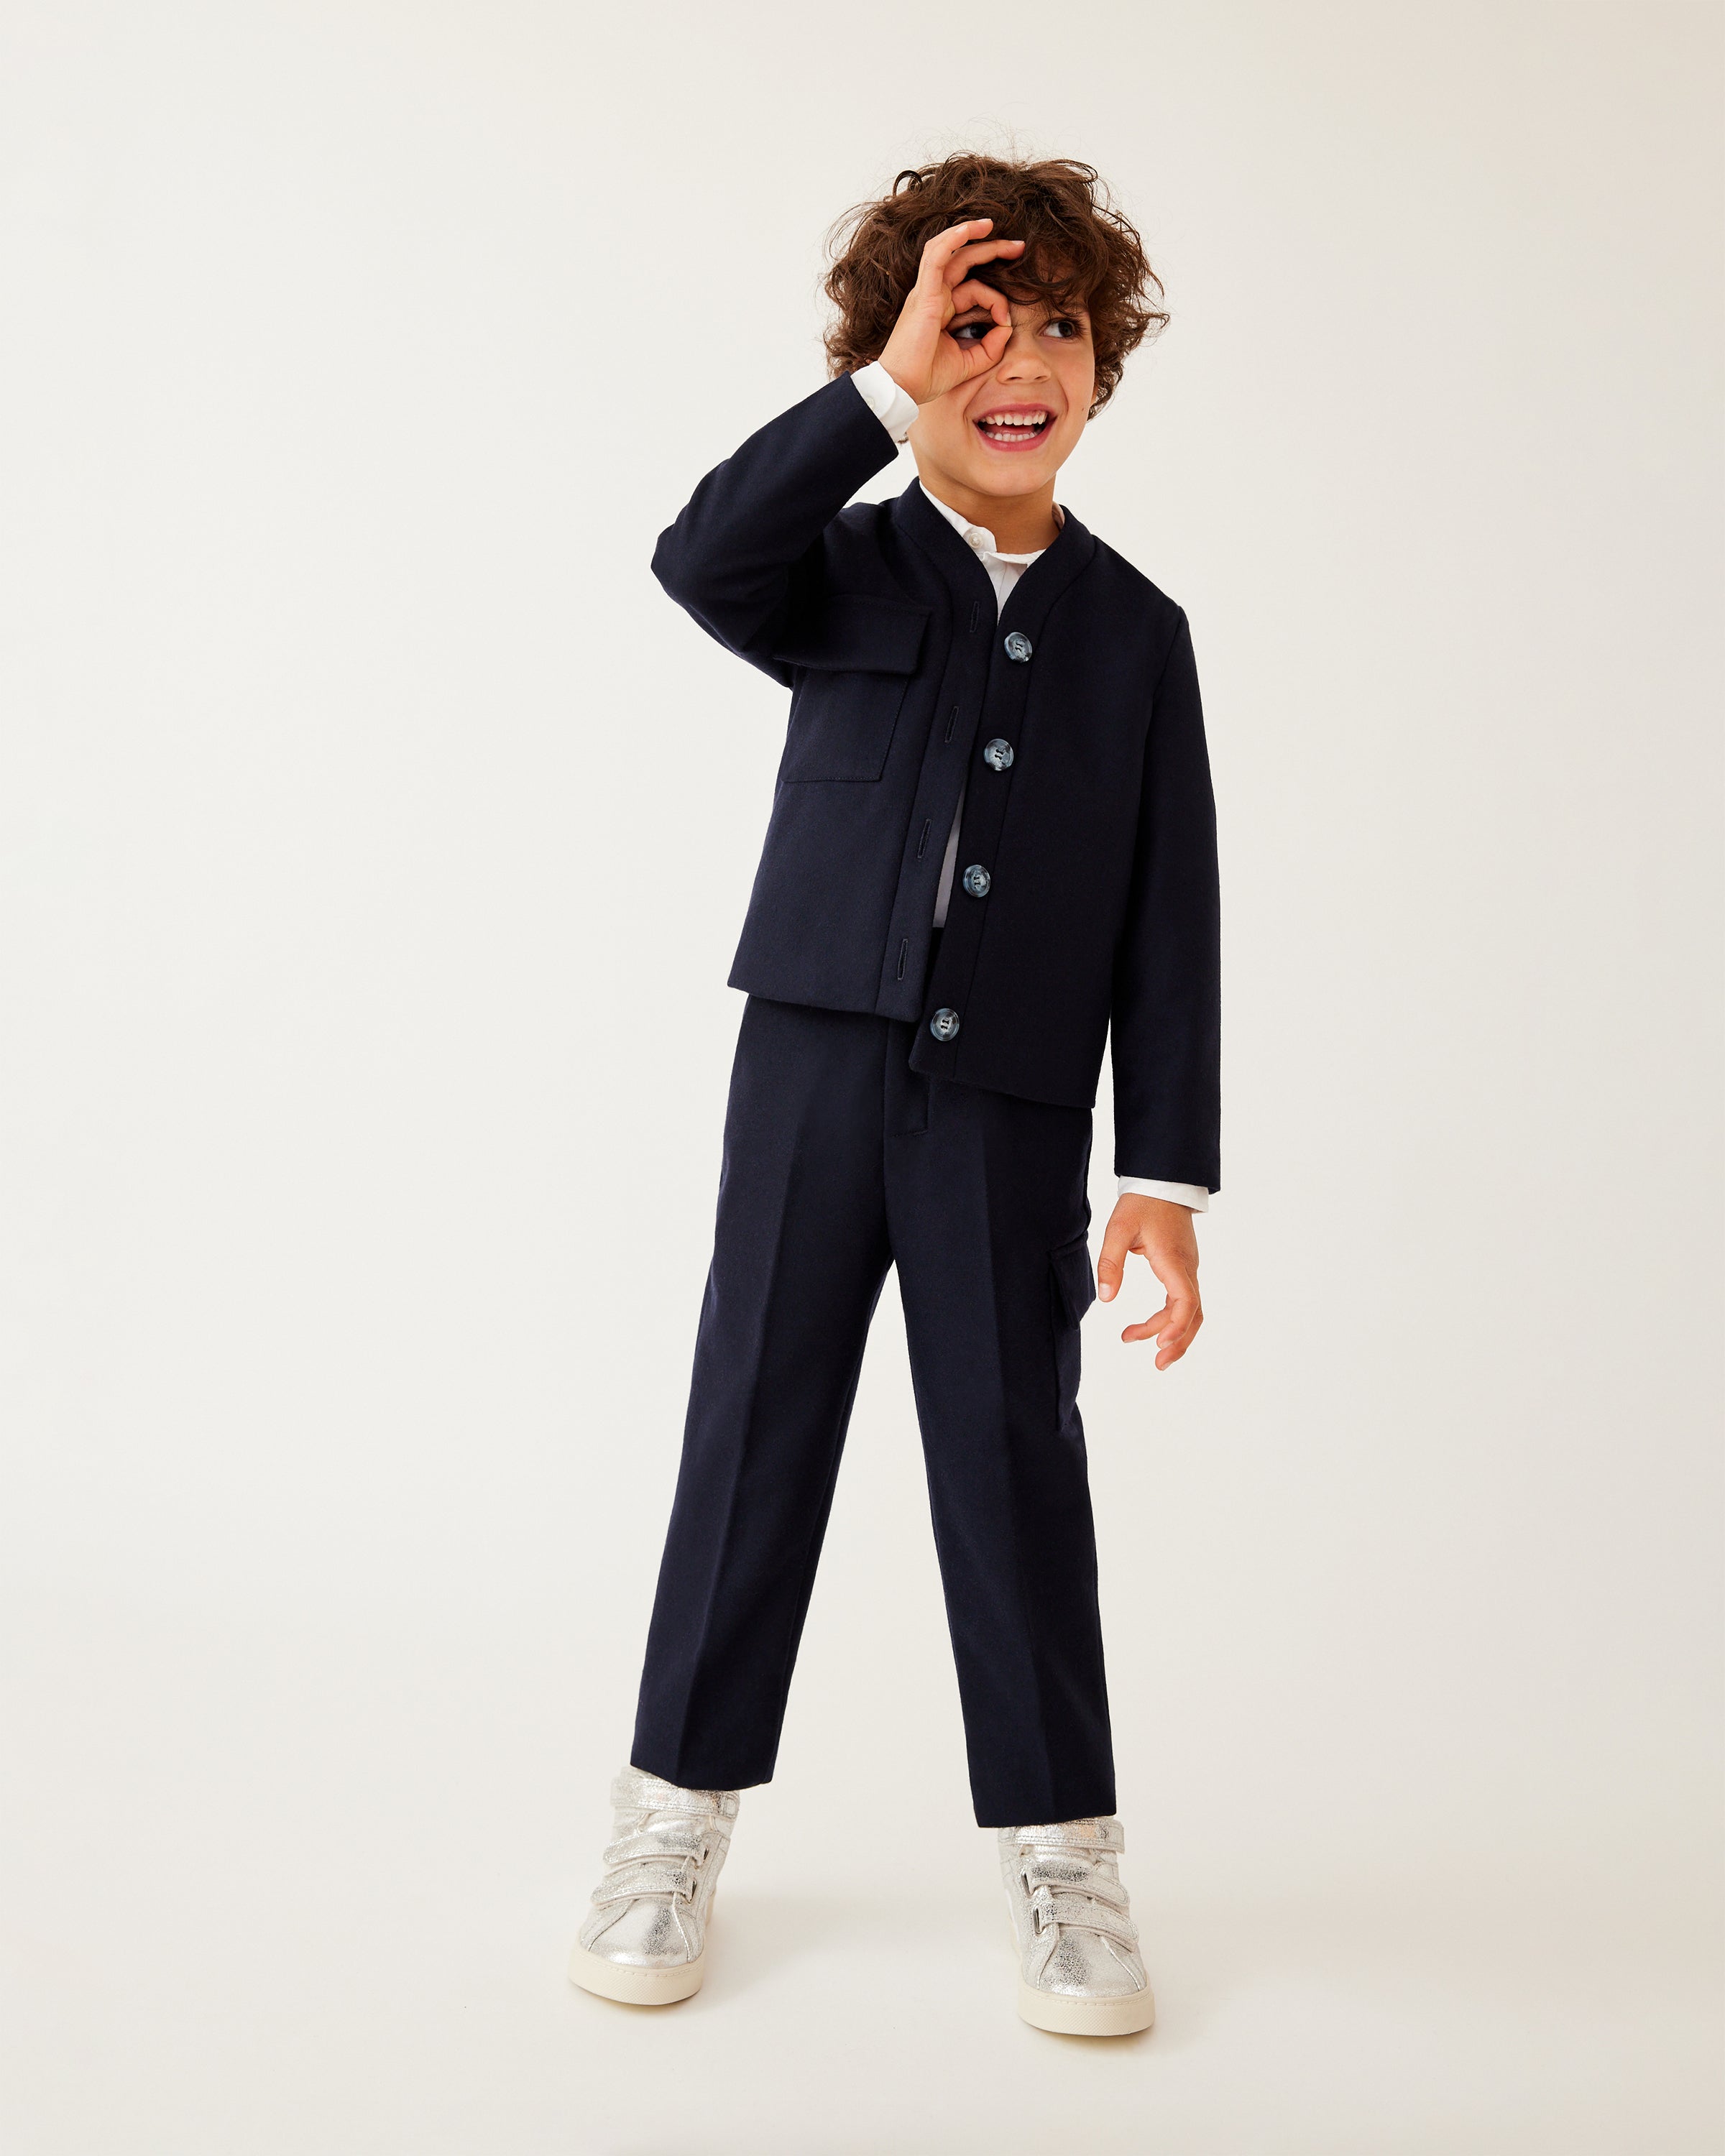 An exclusive line with limited editions proposed by Kelly Kilby for her first kidswear collection for Autumn Winter 2022/2023. Designed for boys and girls between 4 and 10, this genderless collection has been created in order to pay homage to the school outfit, with a modern and timeless cut.